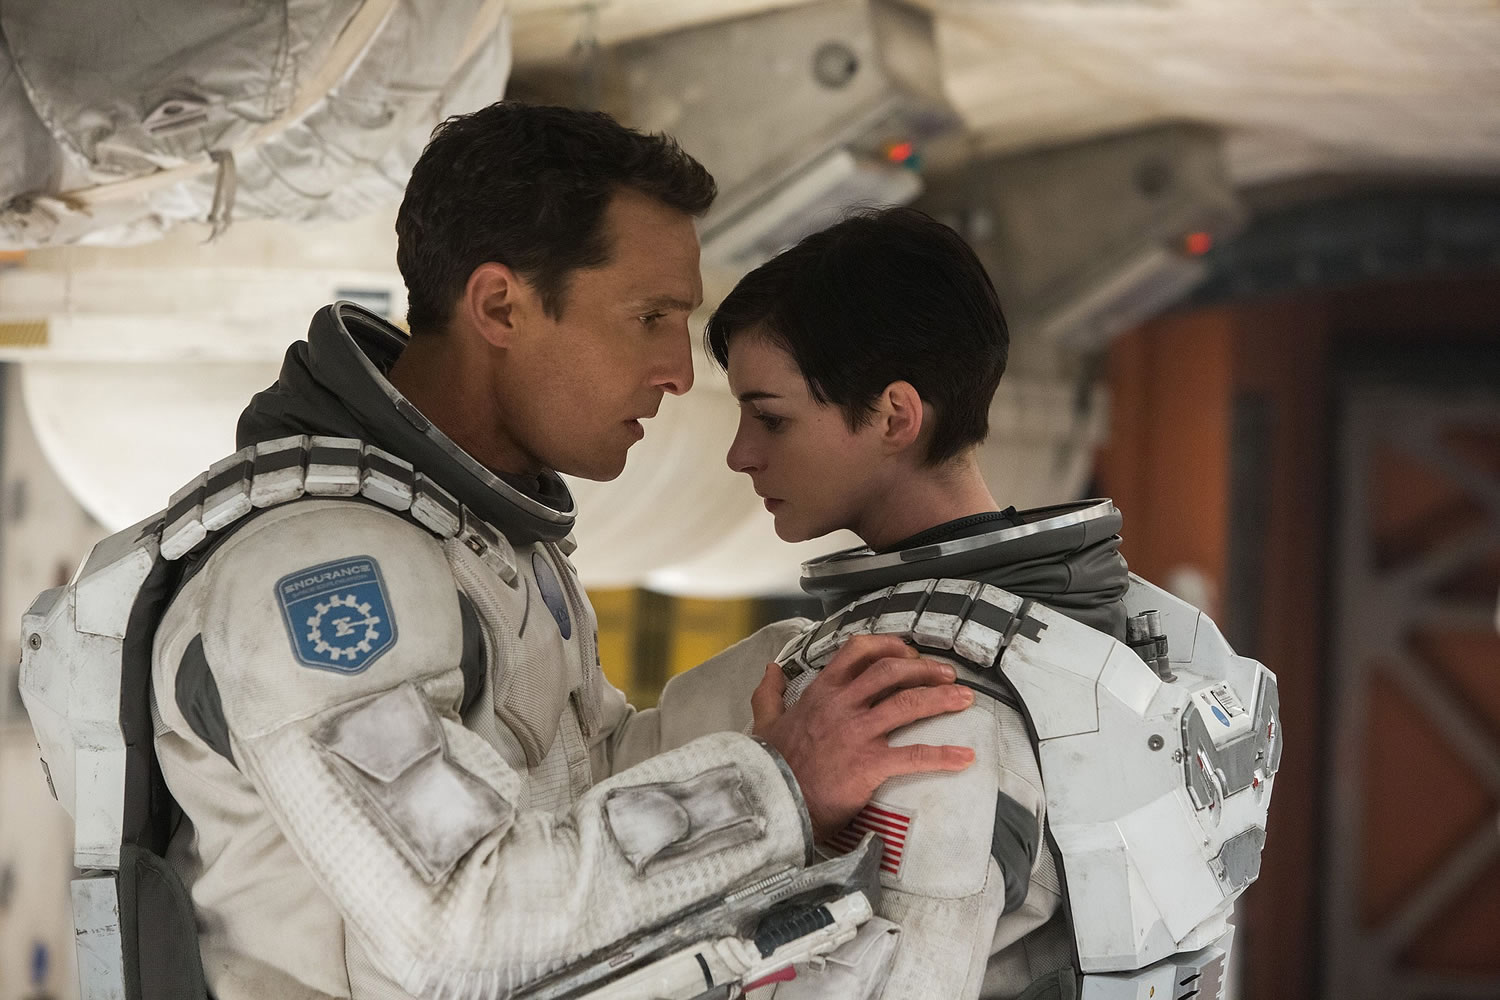 Paramount Pictures
Matthew McConaughey, left, and Anne Hathaway play astronauts in the film &quot;Interstellar.&quot; The film, directed by Christopher Nolan, did not receive any Golden Globe nominations on Thursday.